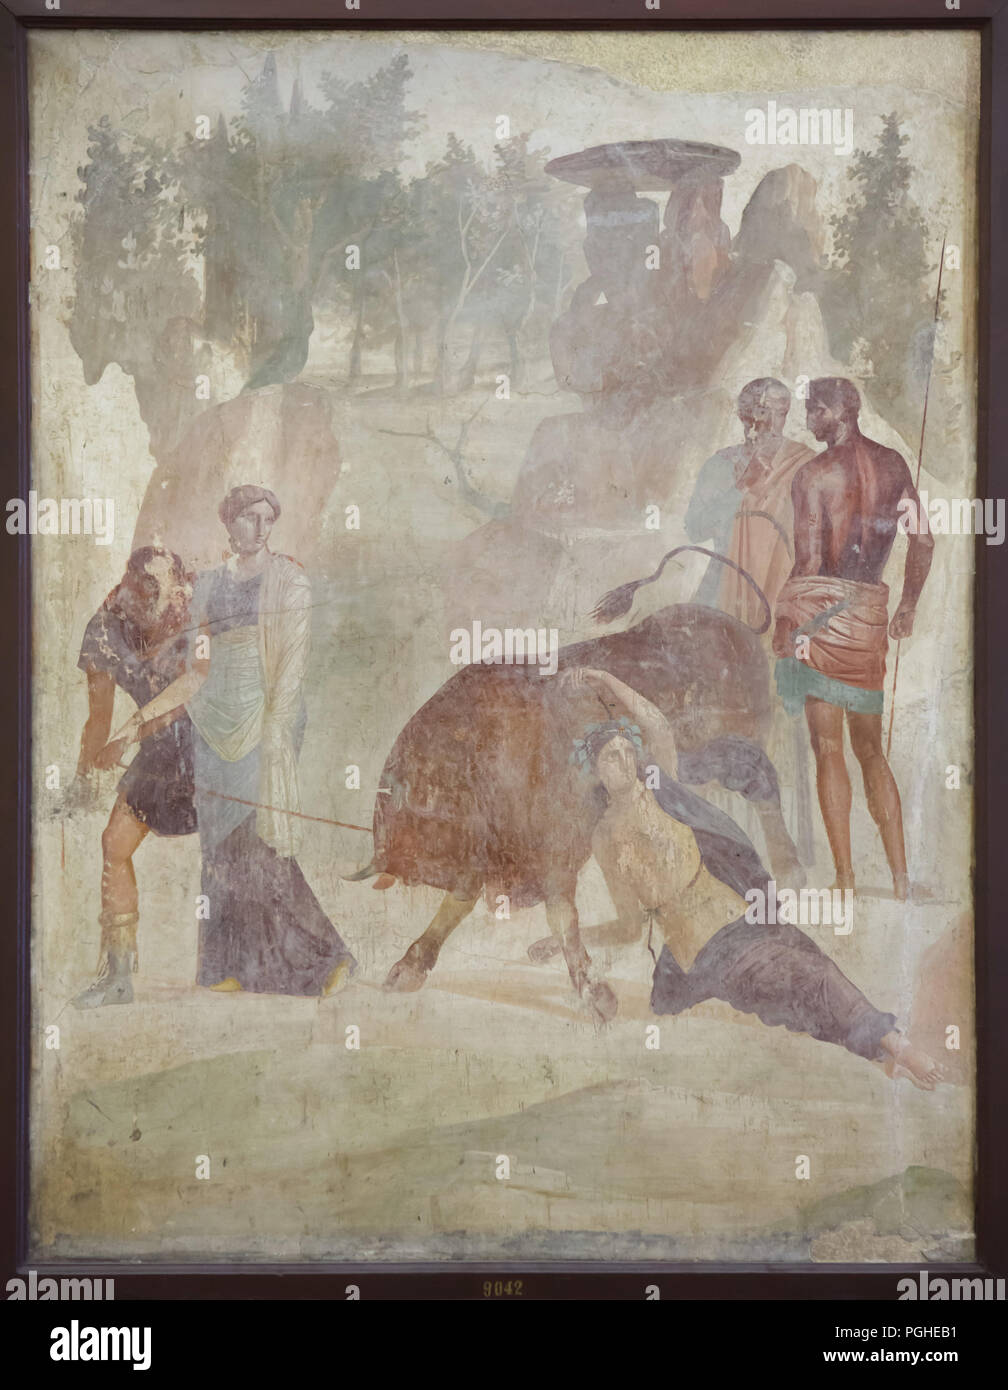 Punishment of Dirce by brothers Amphion and Zethus depicted in the Roman fresco from the House of the Grand Duke (Casa del Granduca di Toscana) in Pompeii (1-79 AD), now on display in the National Archaeological Museum (Museo Archeologico Nazionale di Napoli) in Naples, Campania, Italy. Dirce is tied to the bull by Amphion, with the permission of his brother Zethus, to punish her for the mistreatment she inflicted on their mother Antiope. Antiope looks on with compassion and seems to want to stop the hand of their son. Stock Photo